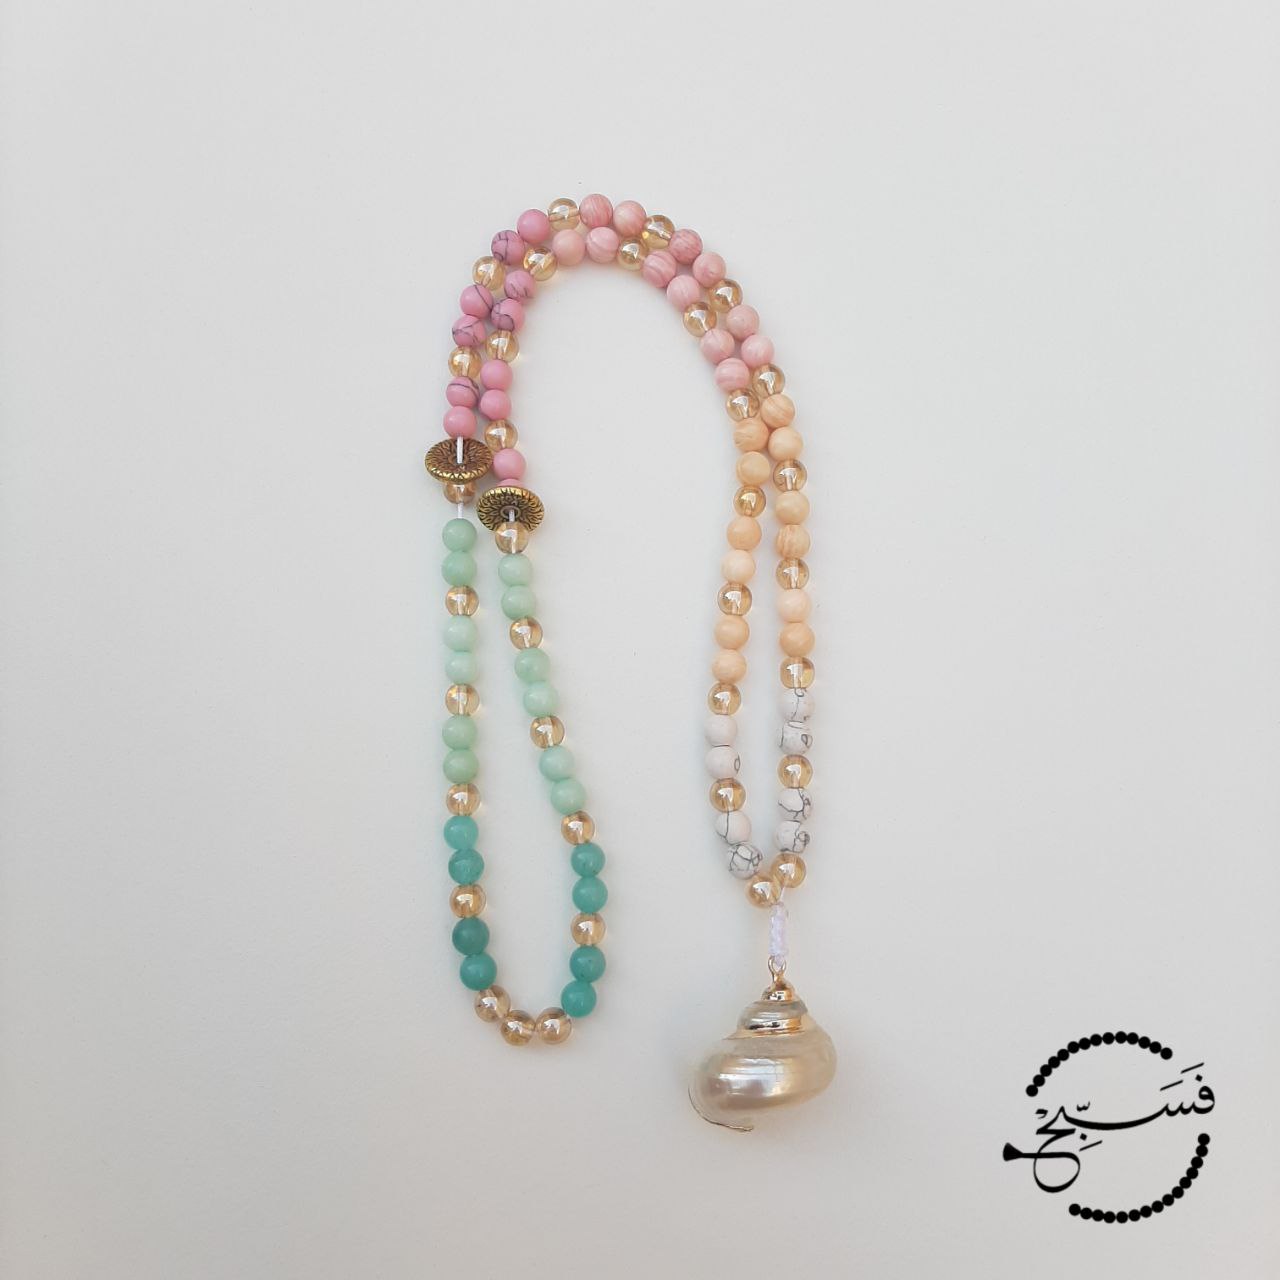 A mix of amazonite, howlite and tridacna shell beads, tied with a cute shell.  Packaged in a luxurious pouch and a gift box.  99 beads